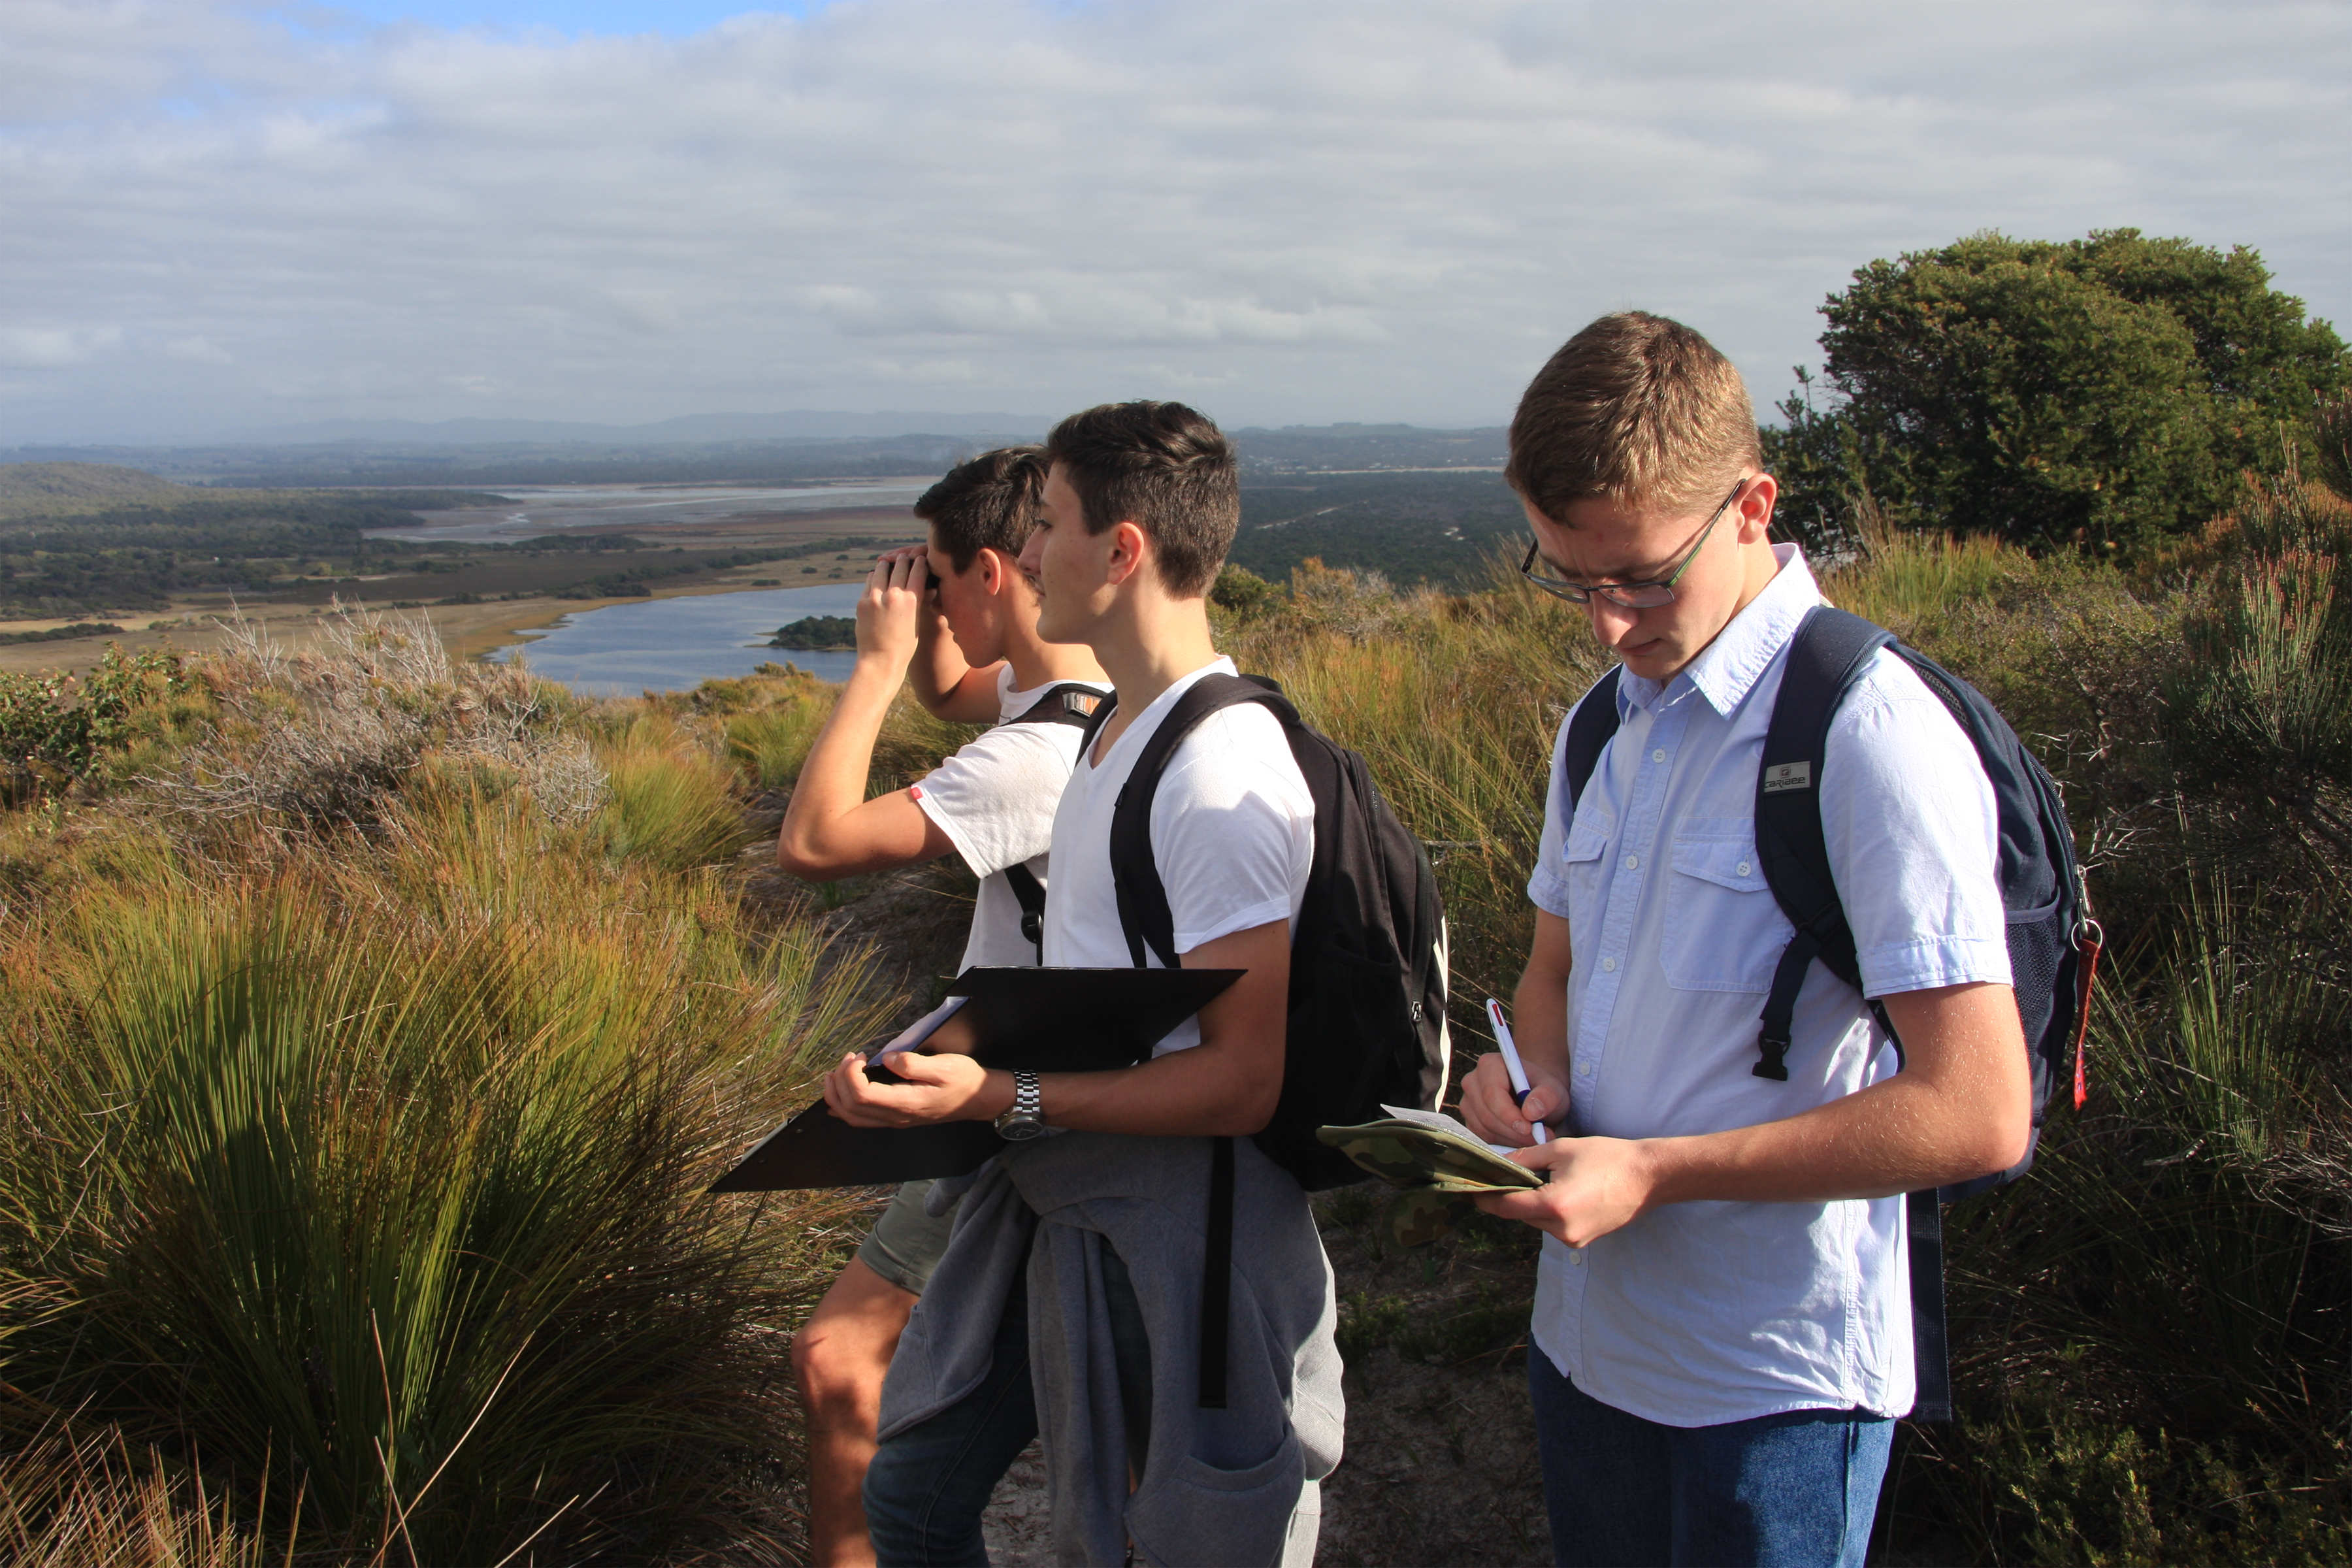 Devonport High School students participating in Where? Where? Wedgie! surveys. Photo: Andrea McQuitty.